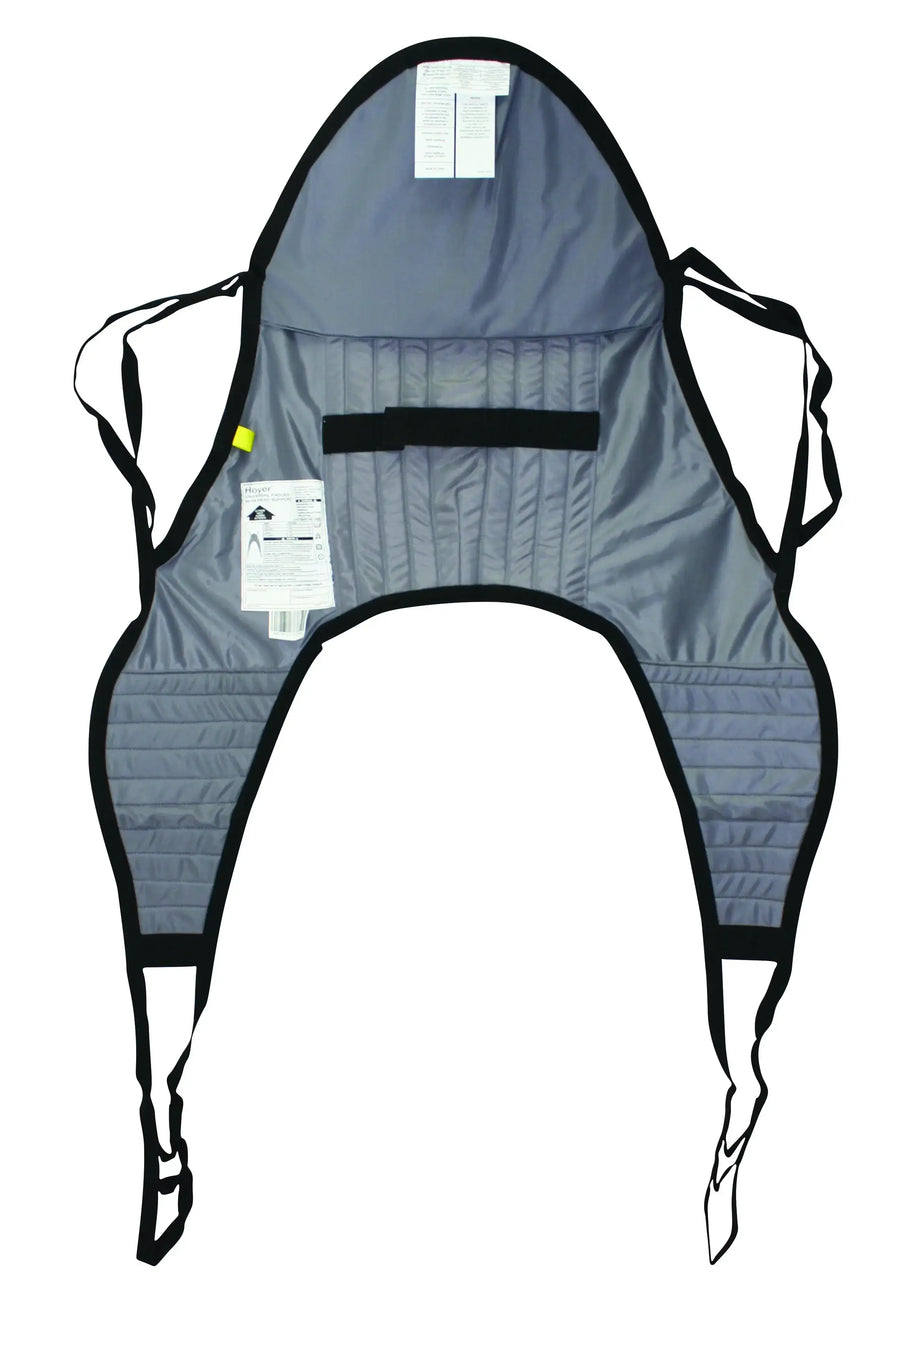 Hoyer - Classic Padded U-Sling with Head Support Patient Lifts Accessories Hoyer 